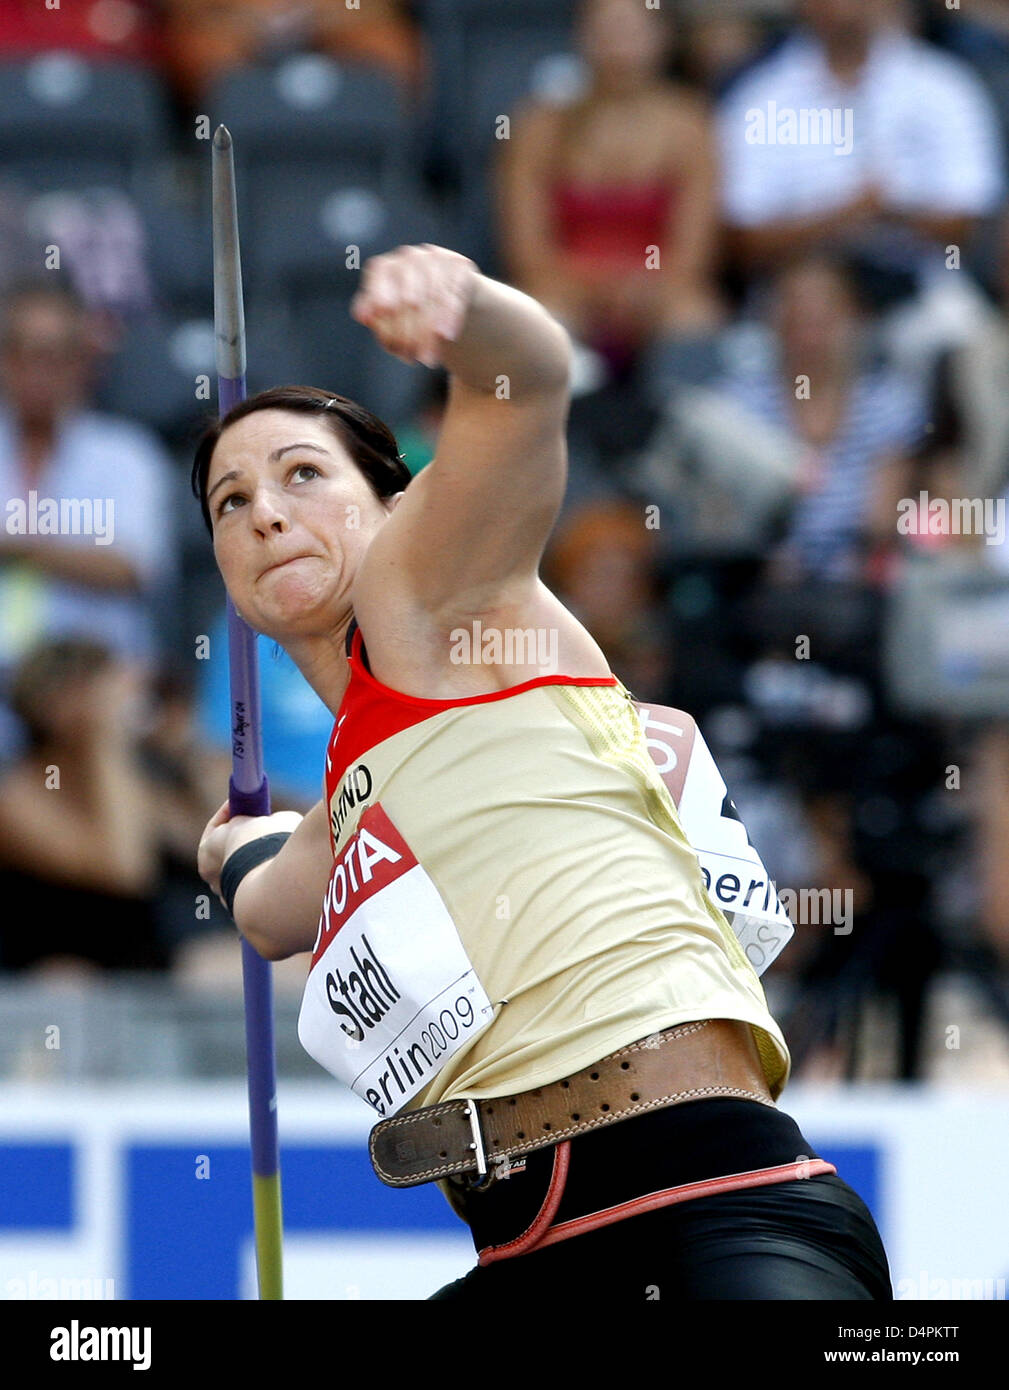 German Linda Stahl shown in action during the women?s javelin qualification at the 12th IAAF World Championships in Athletics in Berlin, Germany, 16 August 2009. Photo: KAY NIETFELD Stock Photo